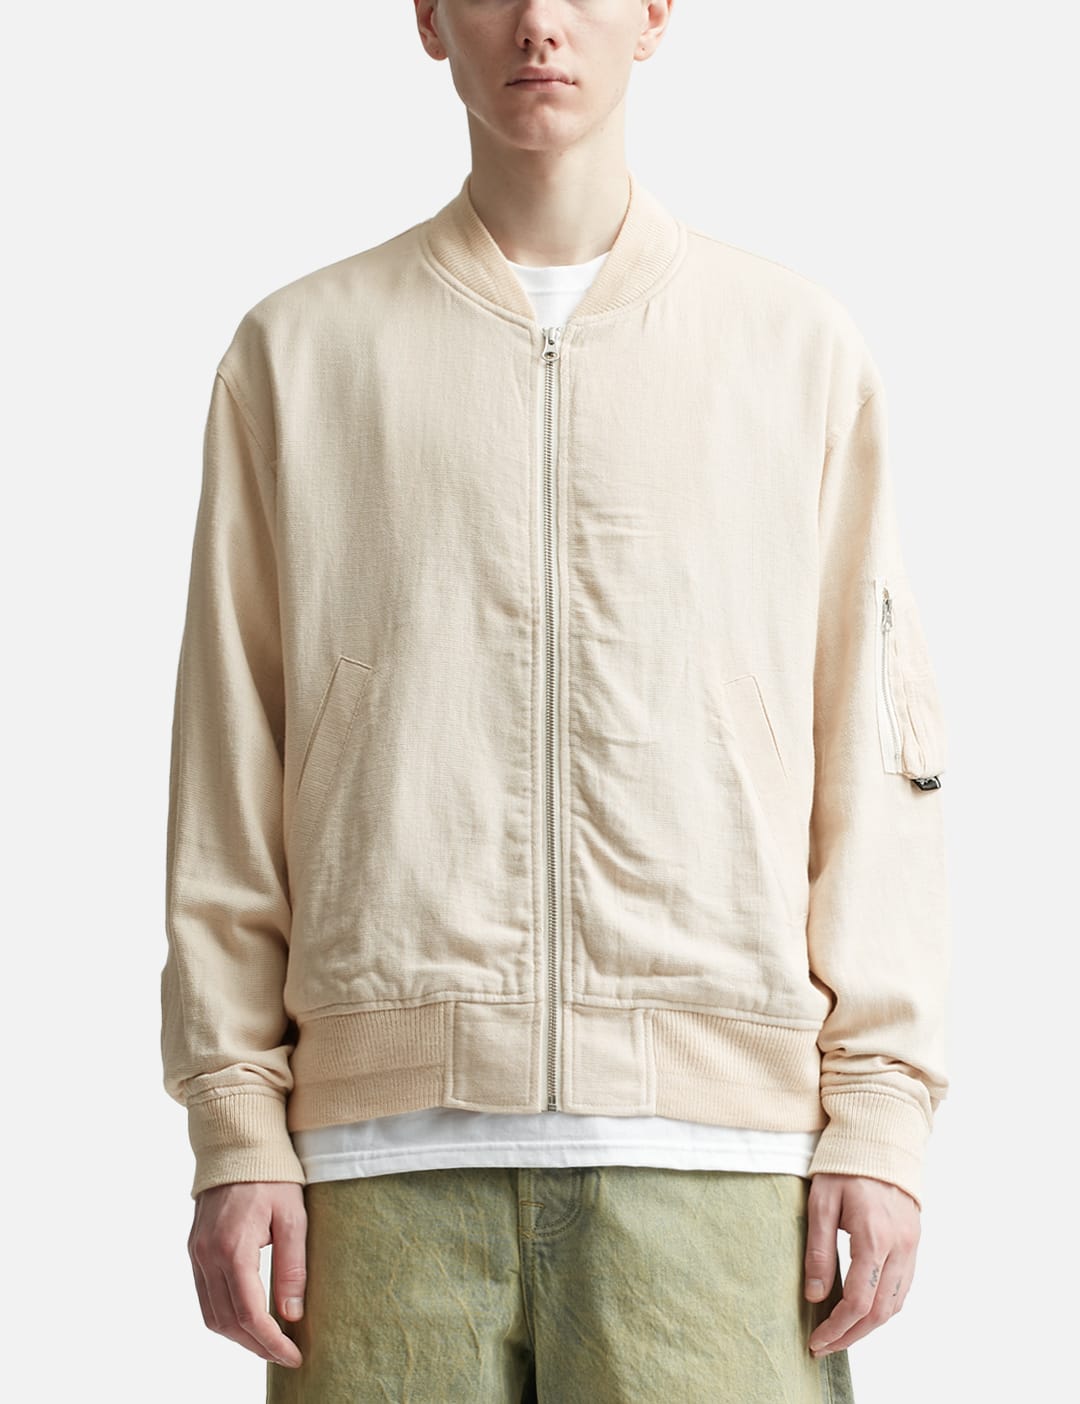 Stüssy - Linen Beach Bomber | HBX - Globally Curated Fashion and